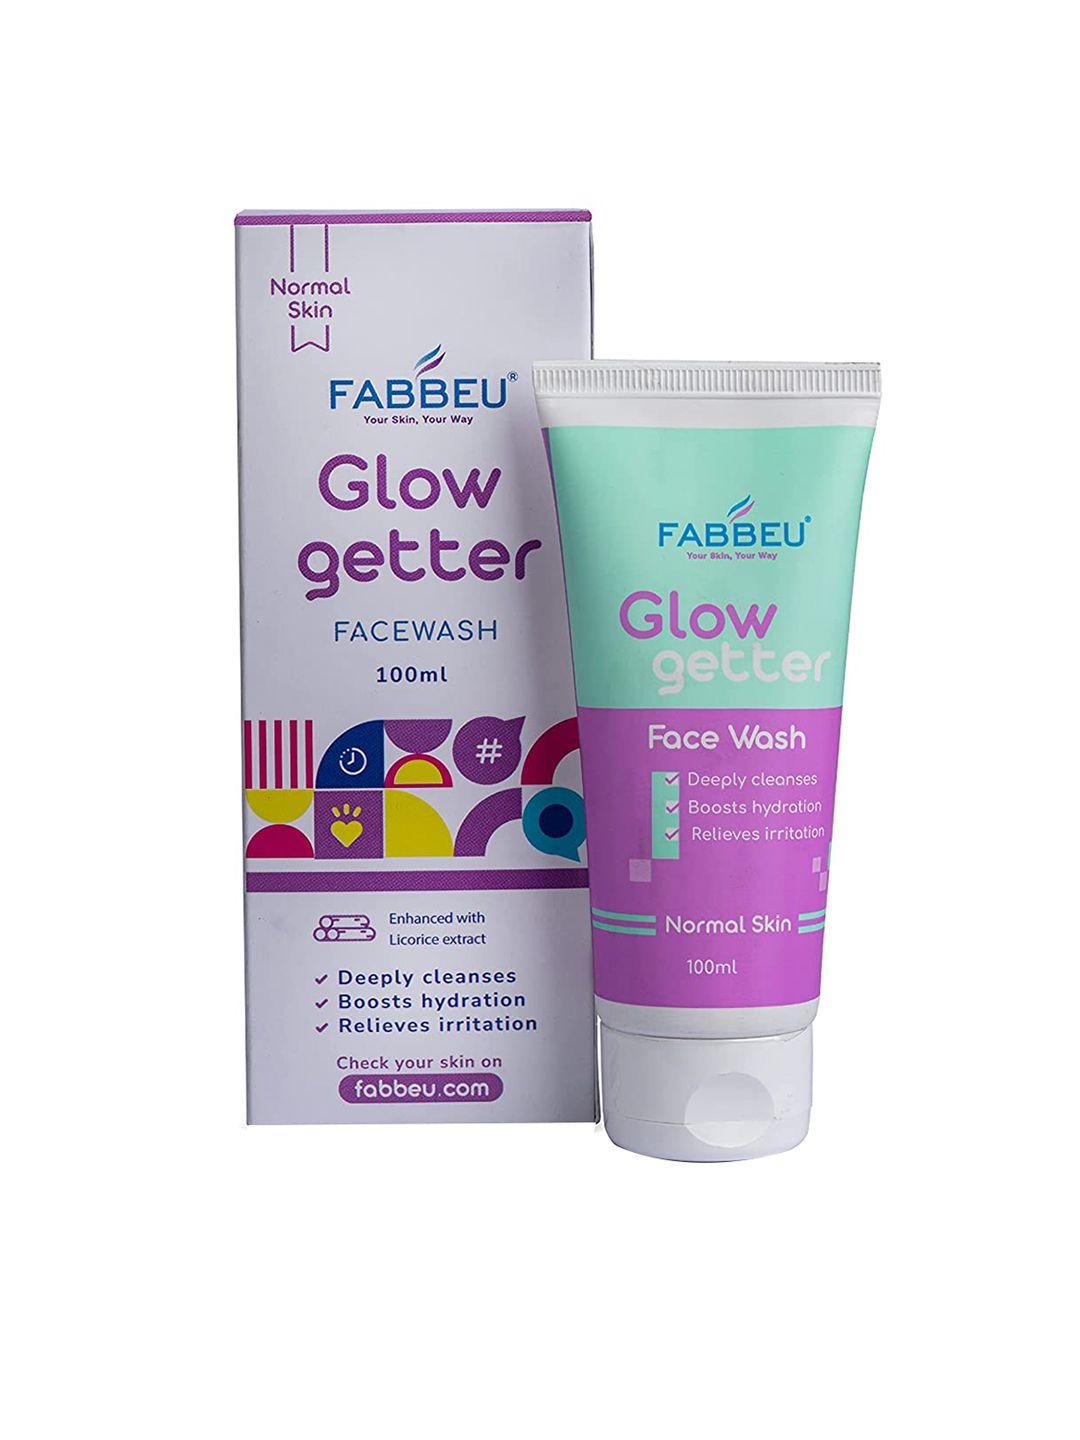 fabbeu glow getter face wash for normal skin 100ml